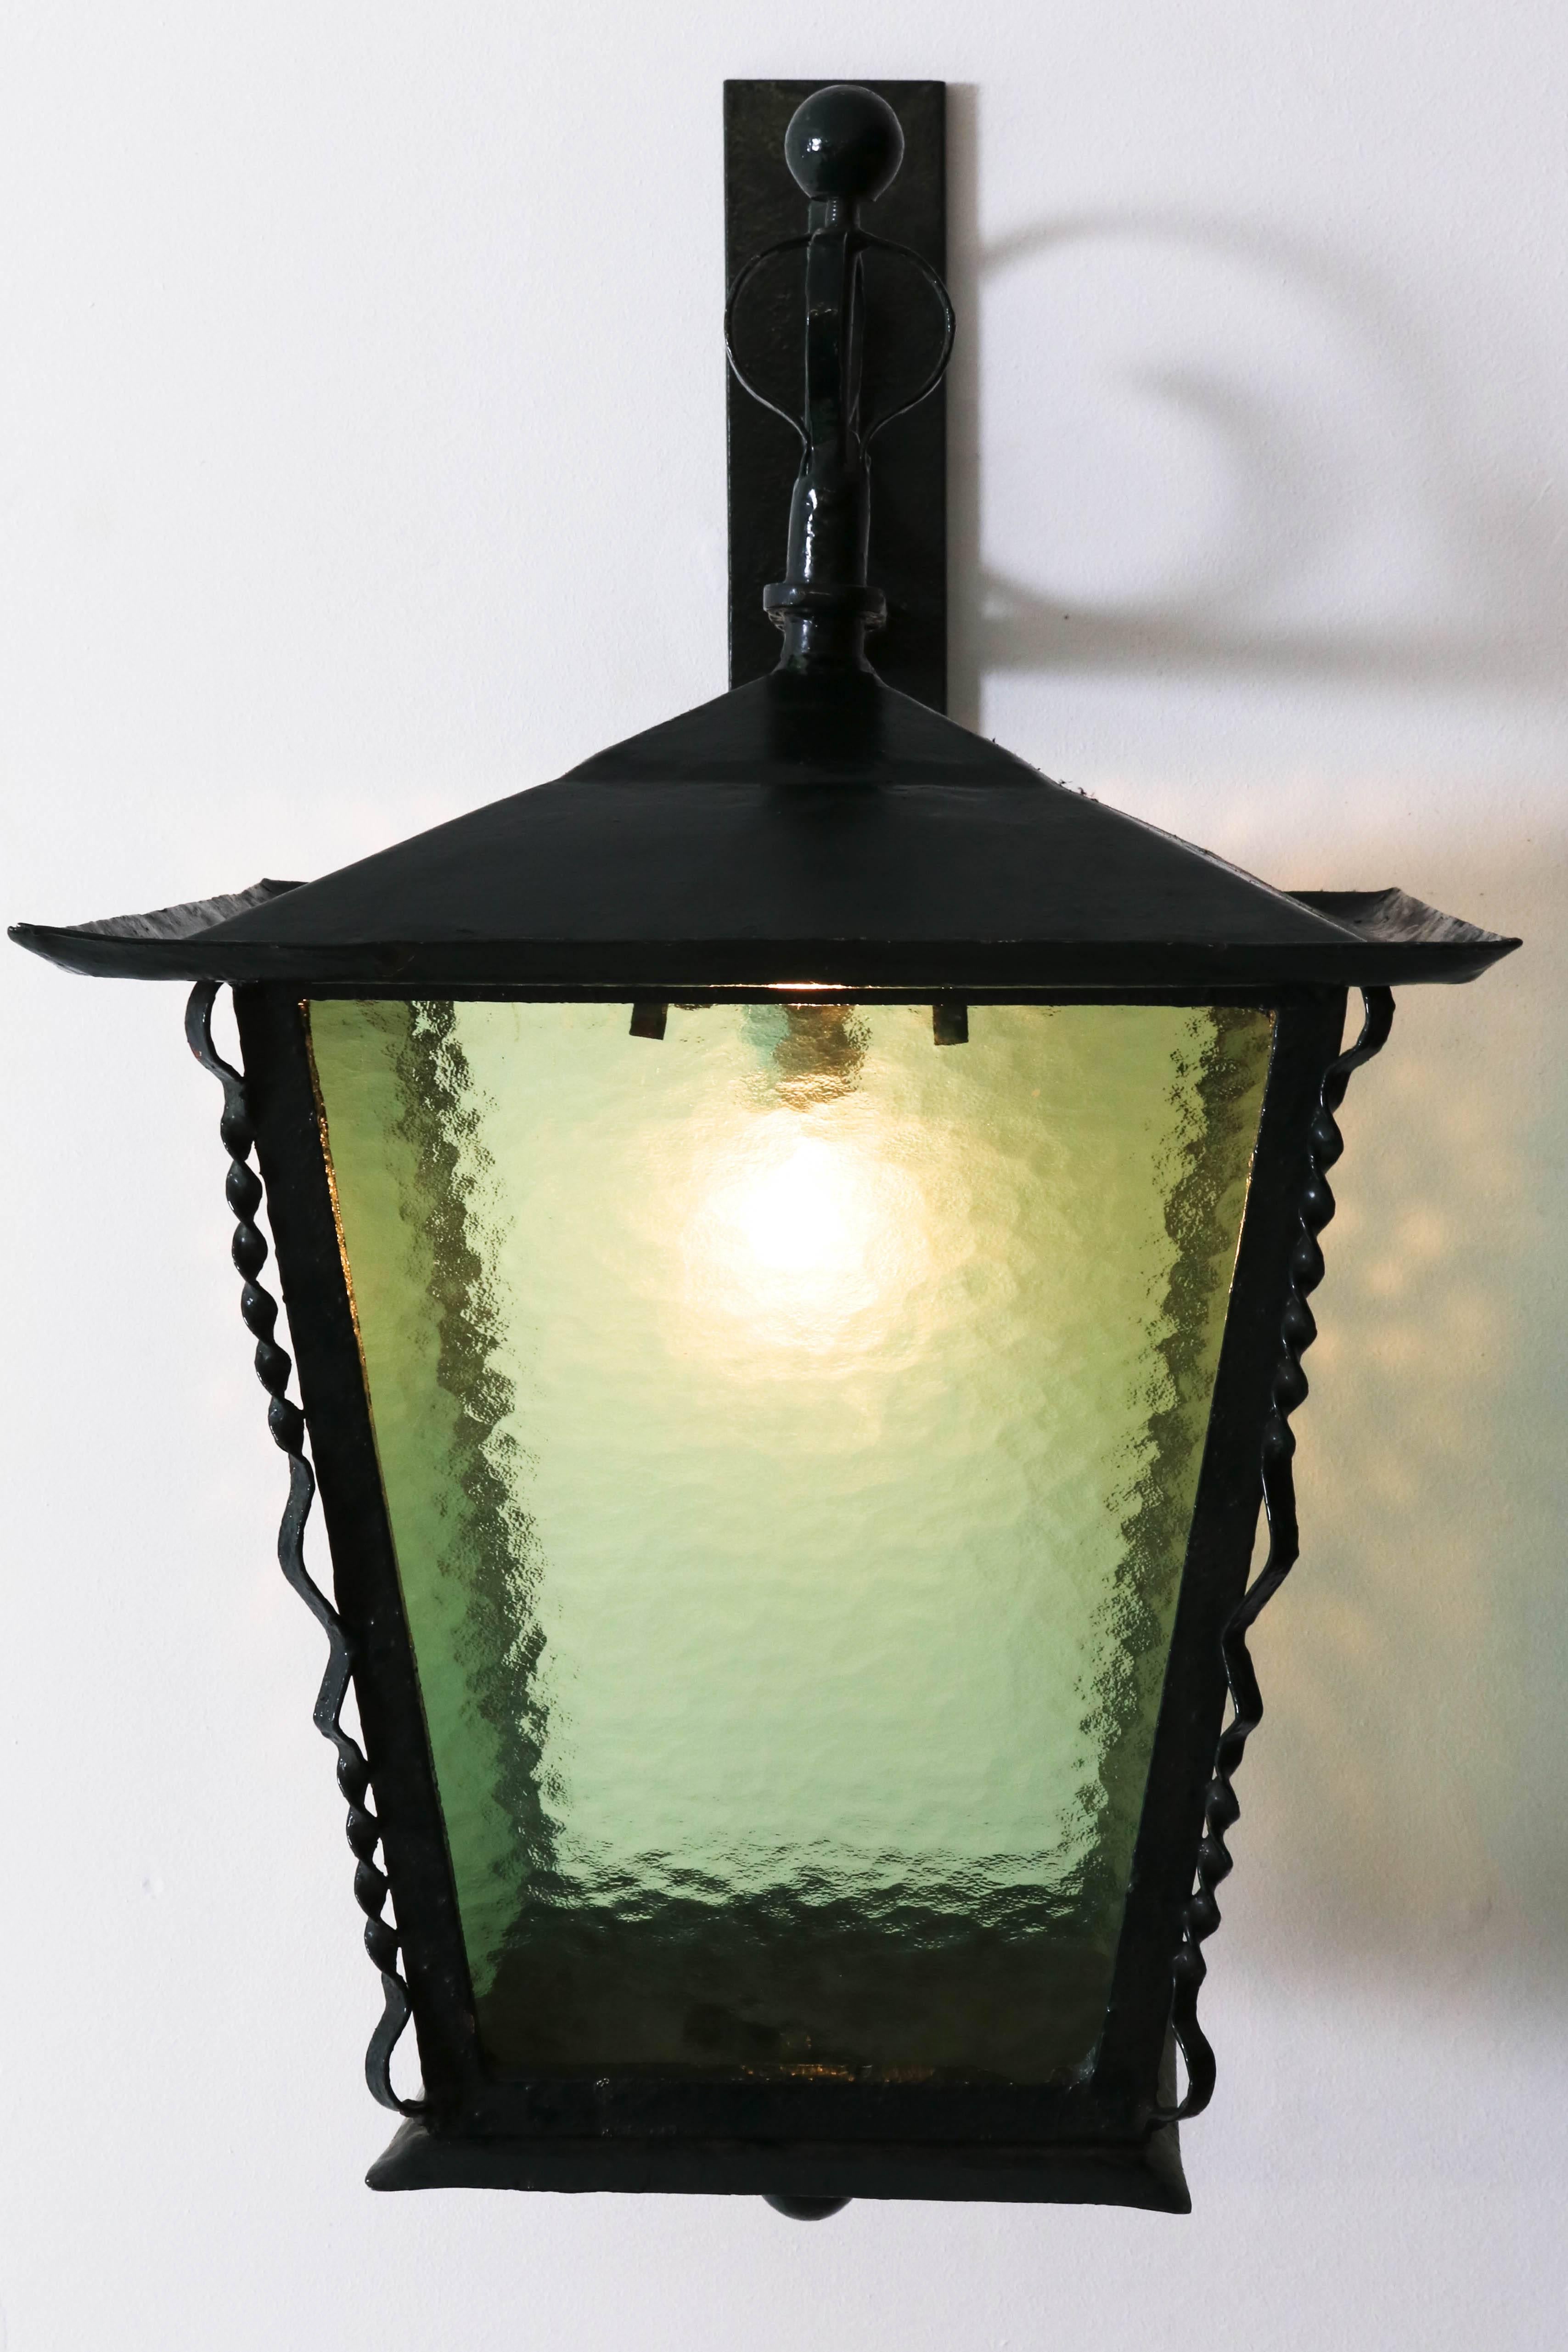 Large and rare wrought iron Art Deco Amsterdam School wall-mounted lantern, 1920s.
Four original green glass shades.
Rewired with one socket for E-27 light bulb.
In good original condition with minor wear consistent with age and use,
preserving